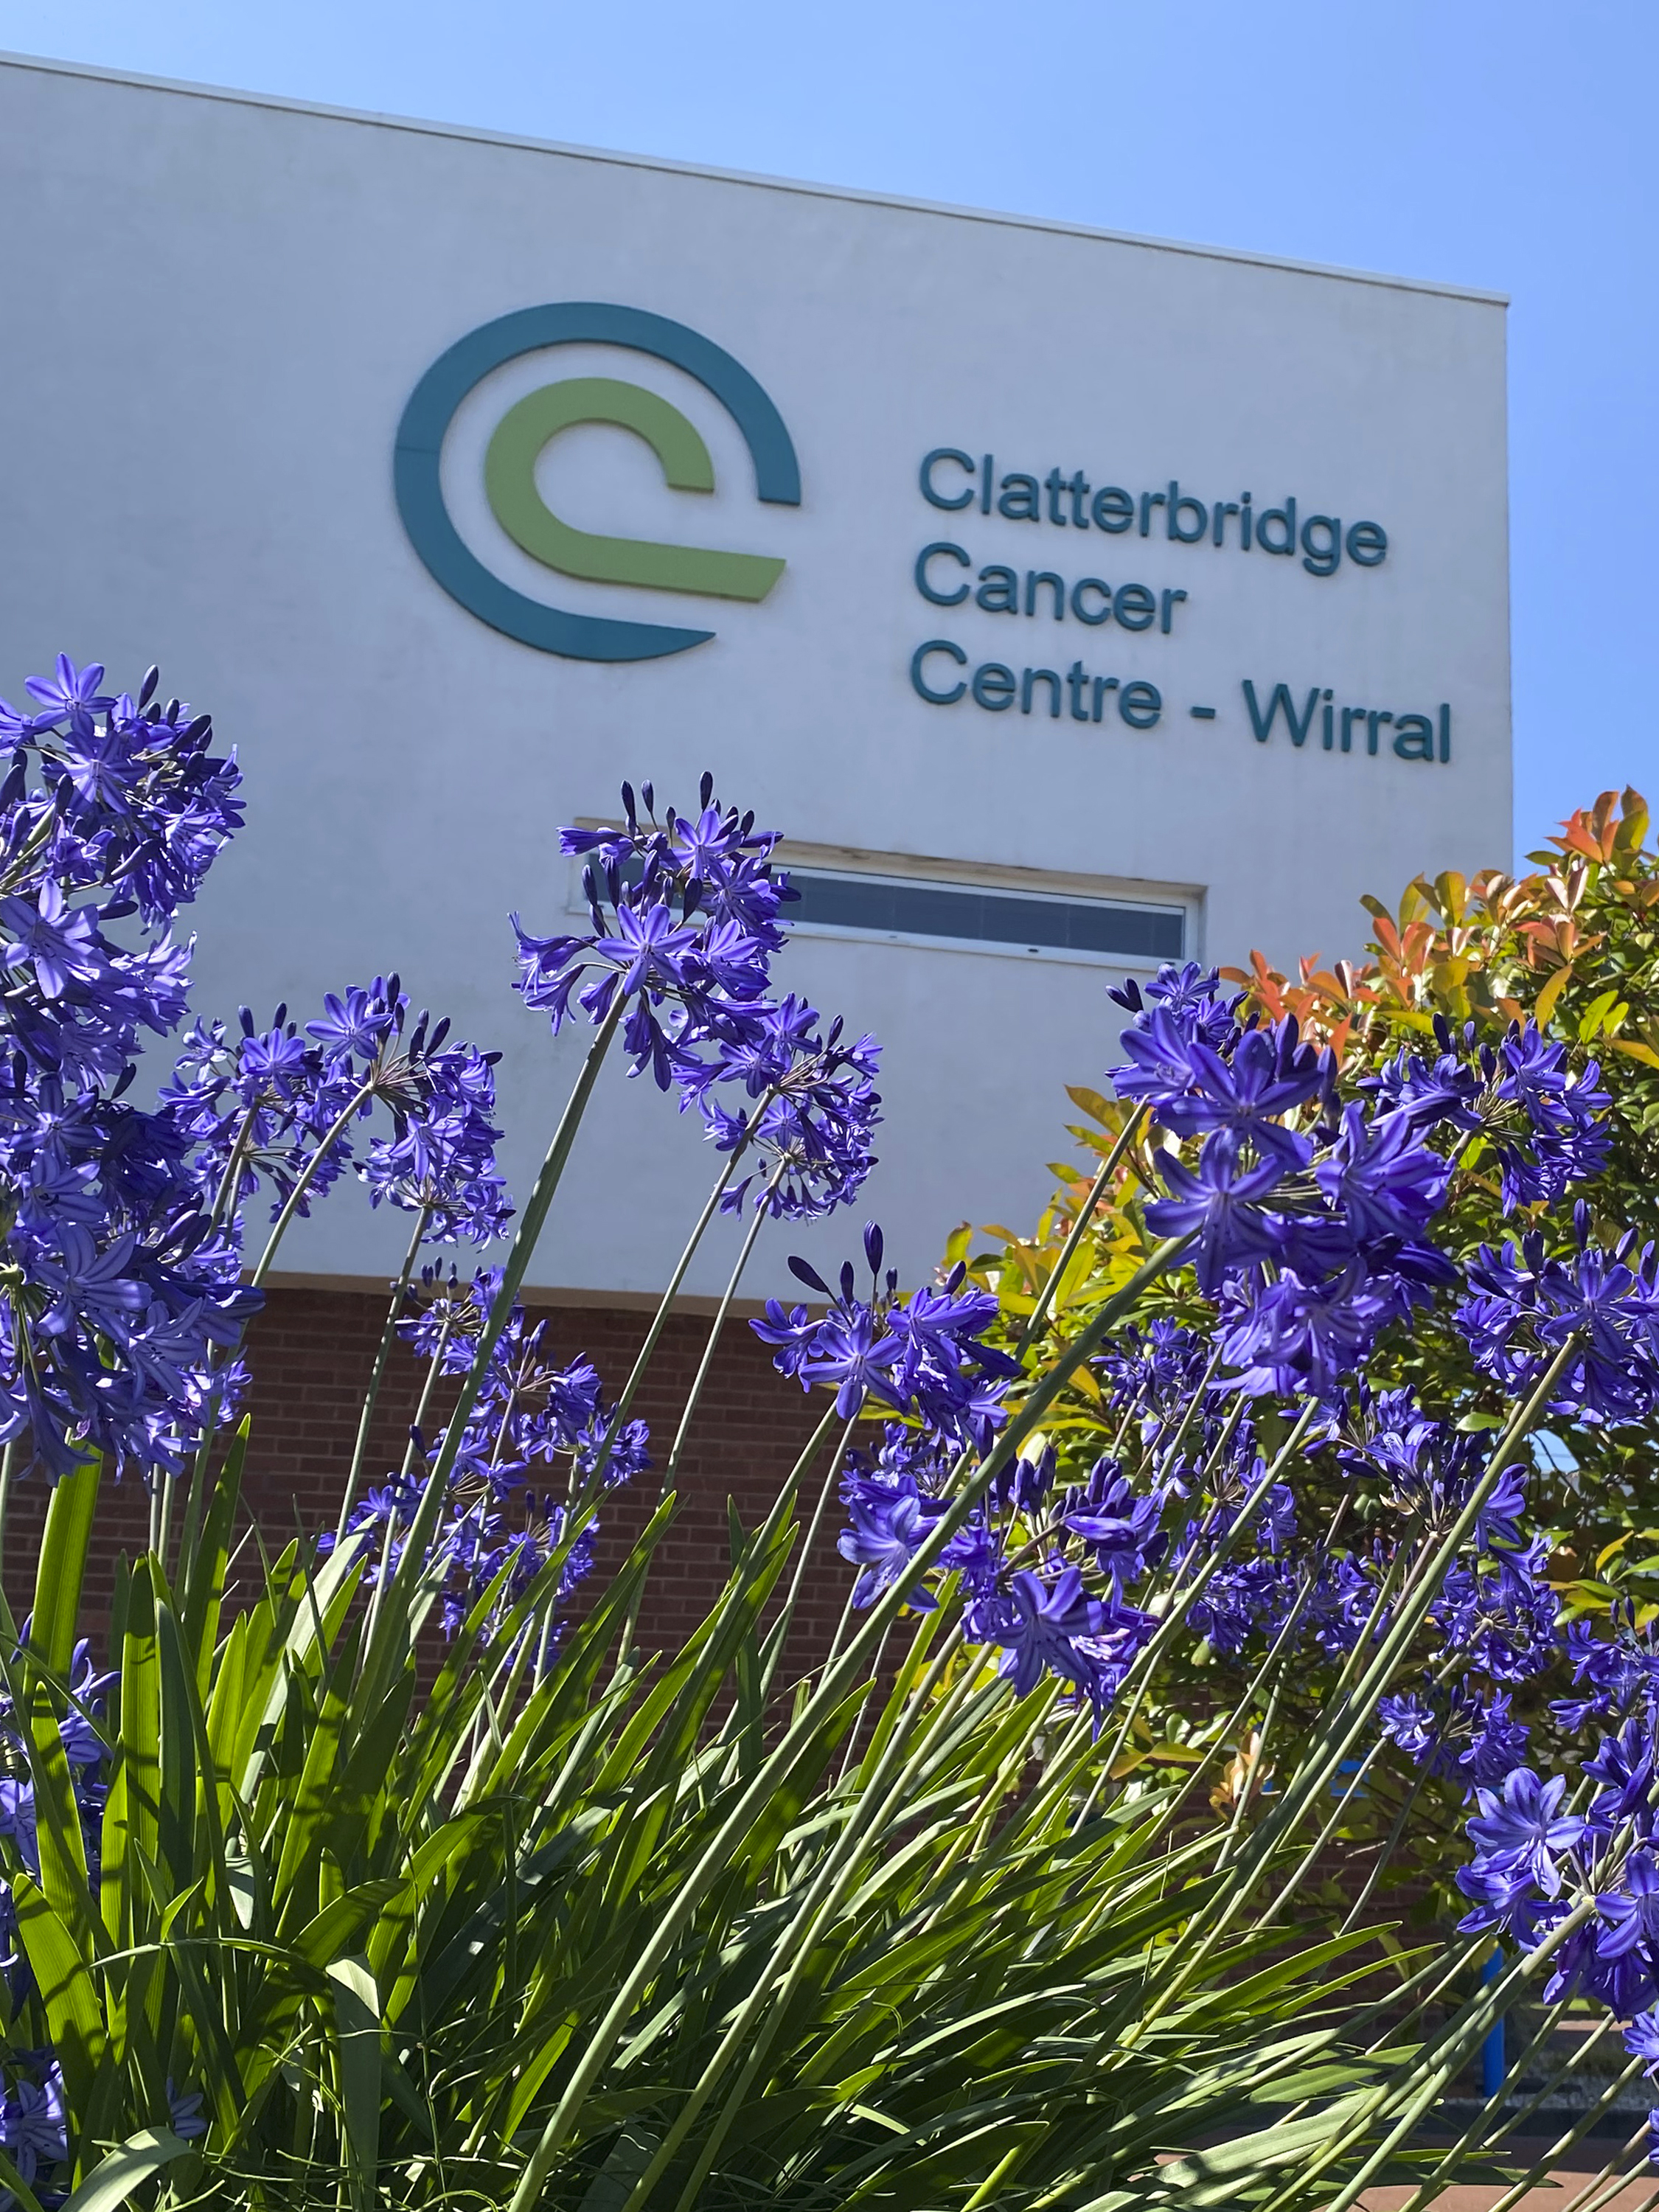 Picture of exterior of Clatterbridge Cancer Centre - Wirral in summer with purple flowers in bloom in front of the hospital signage 